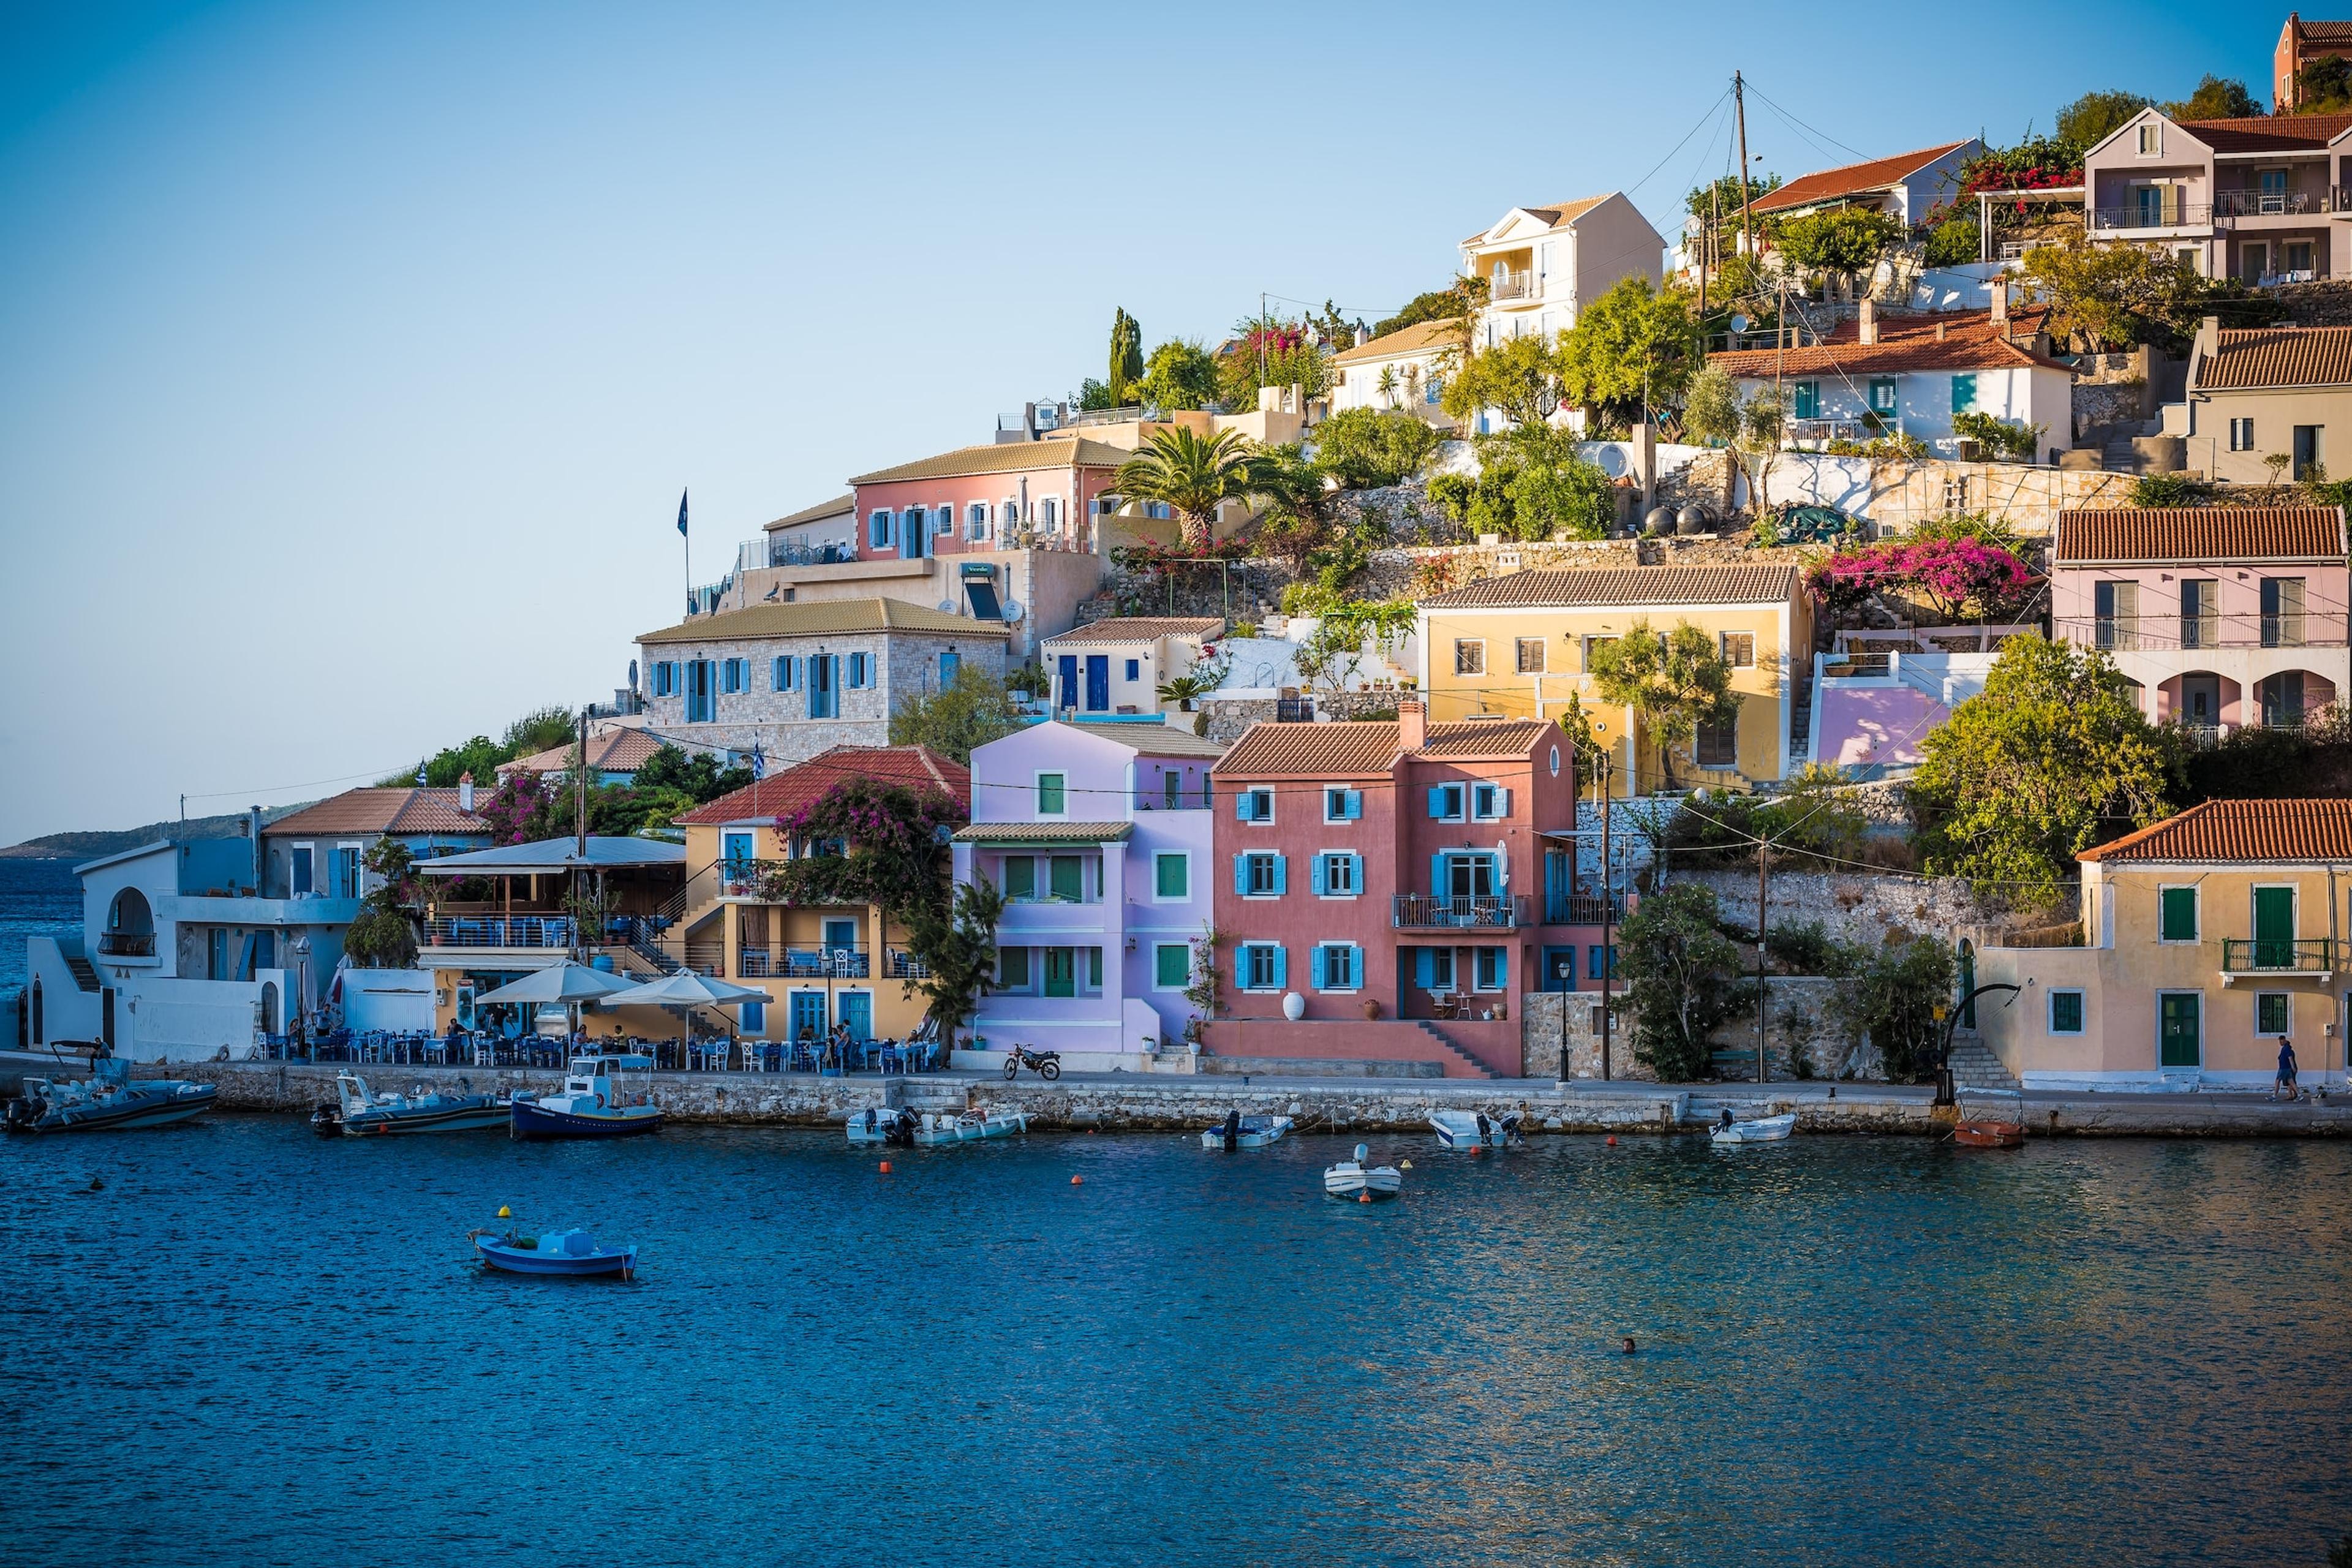 Greek town with colourful houses by the sea